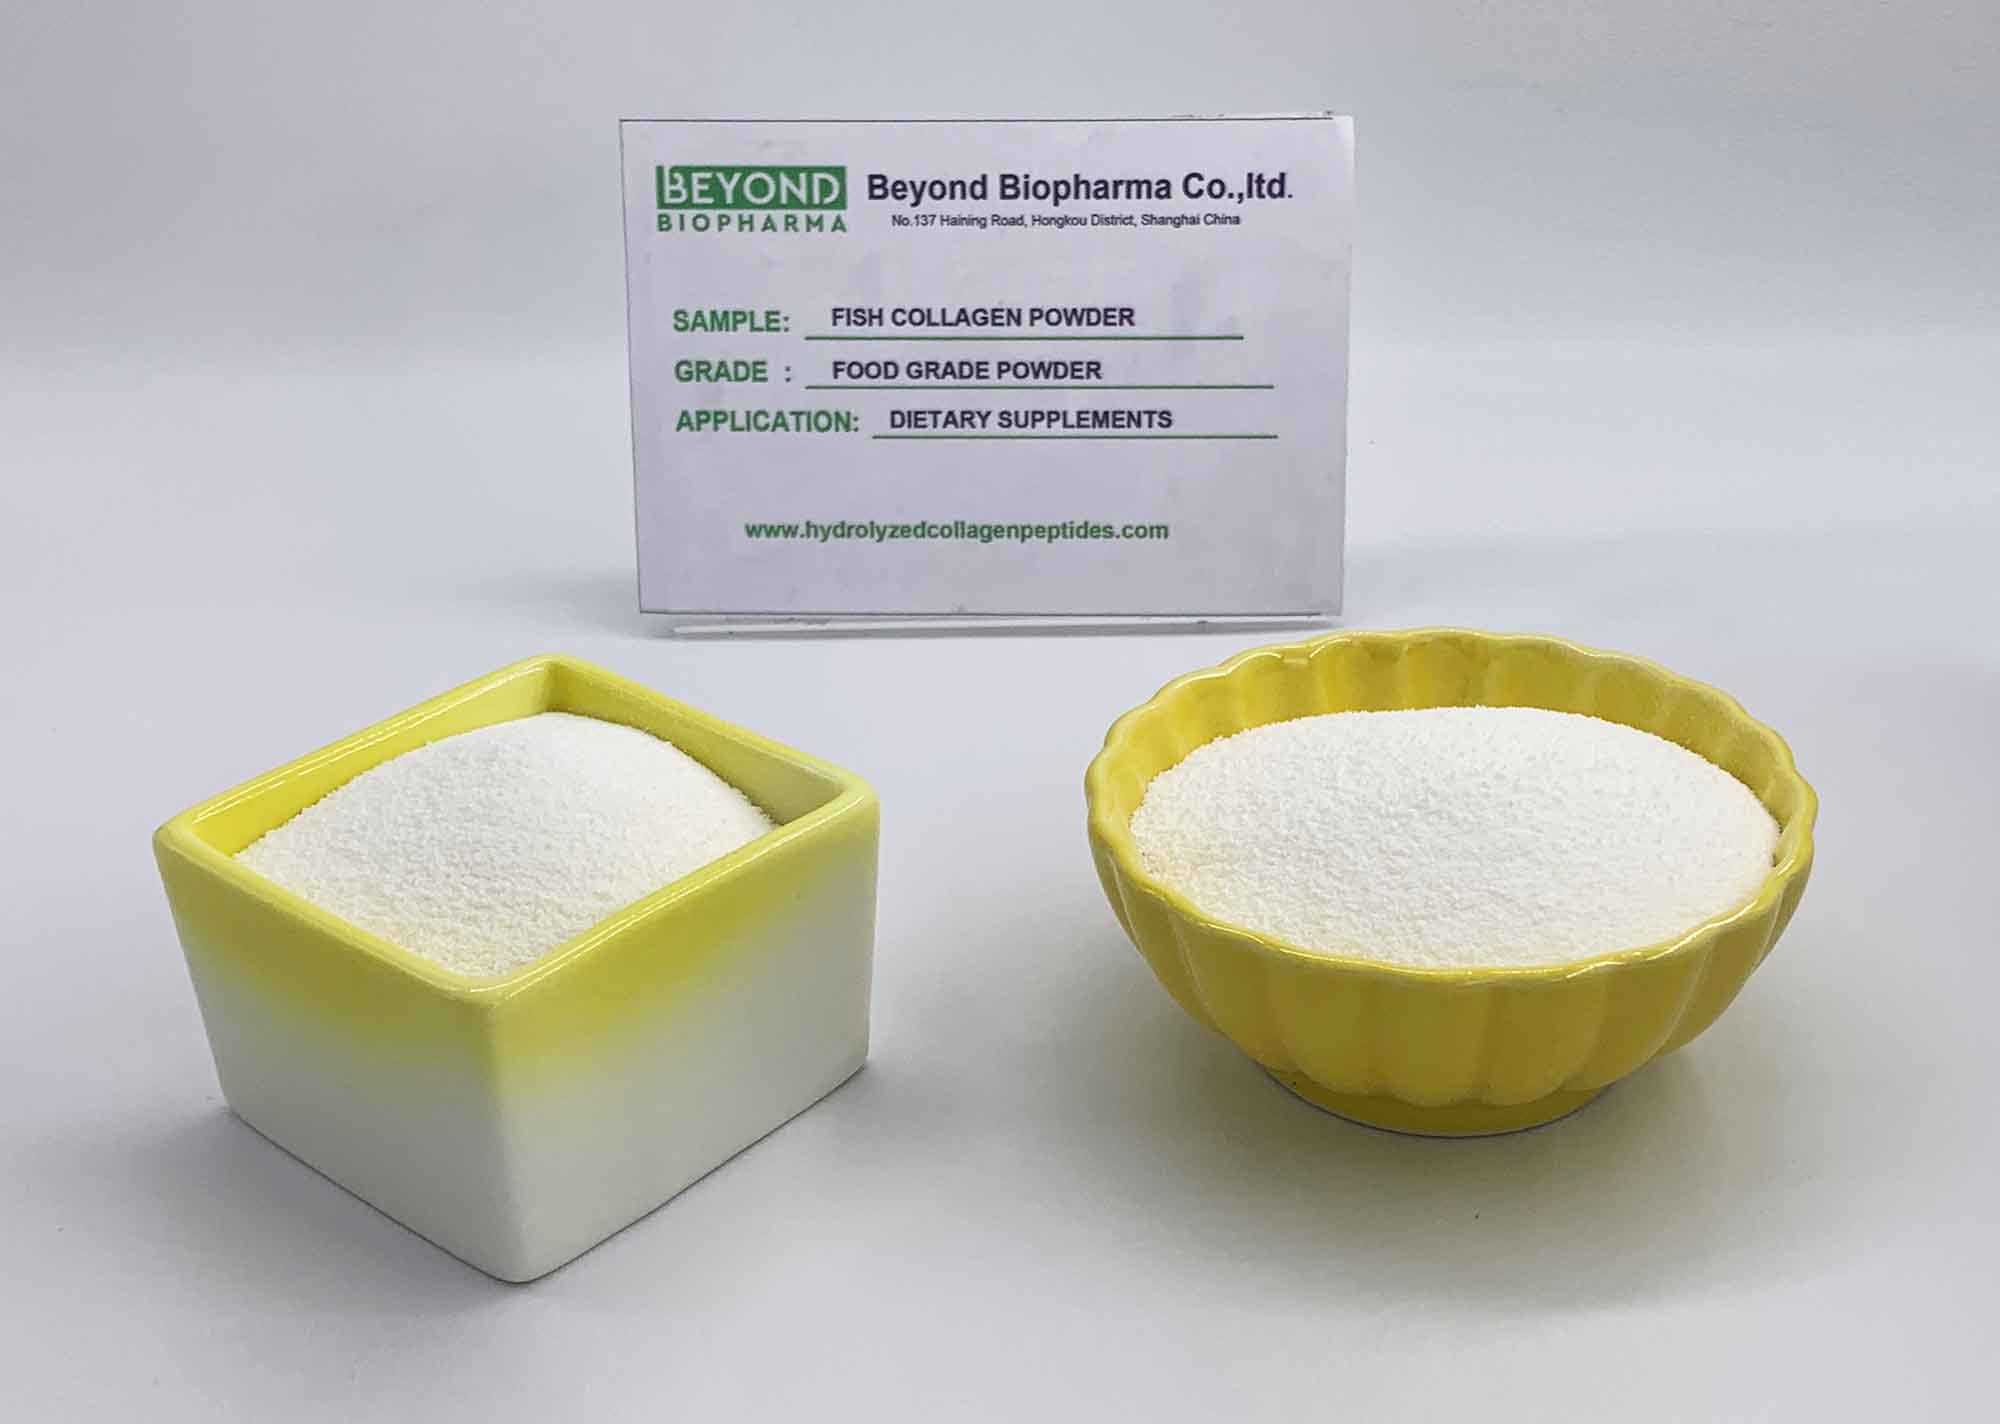 Fish Collagen Powder produced from Alaska Cod Fish Skin for Skin beauty Supplements Products